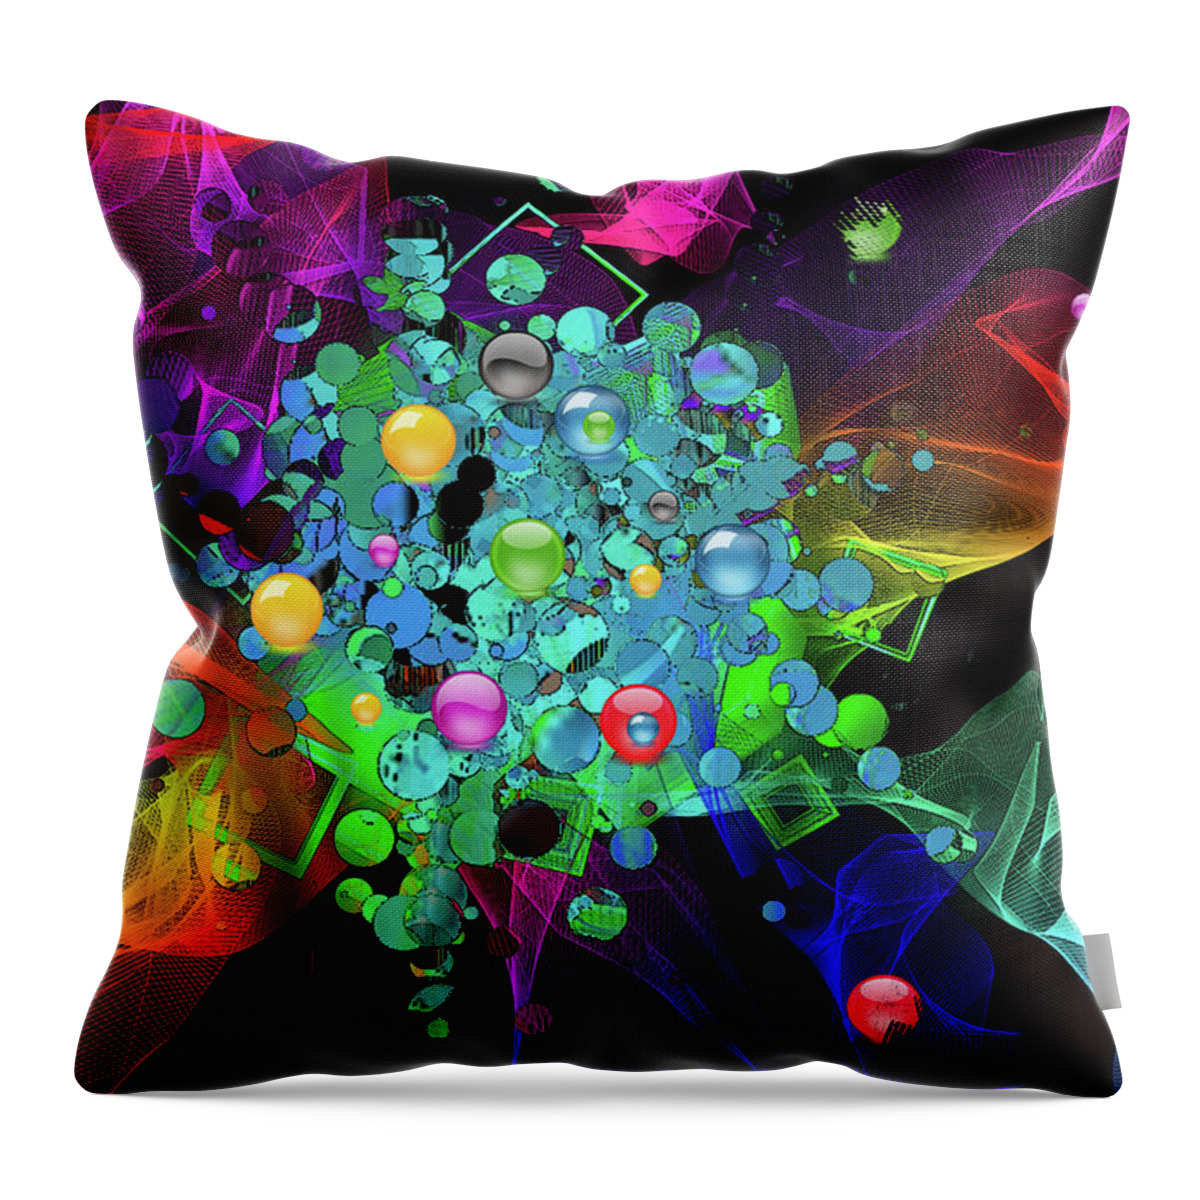 Abstract Throw Pillow featuring the digital art Ecstasy by Gerlinde Keating